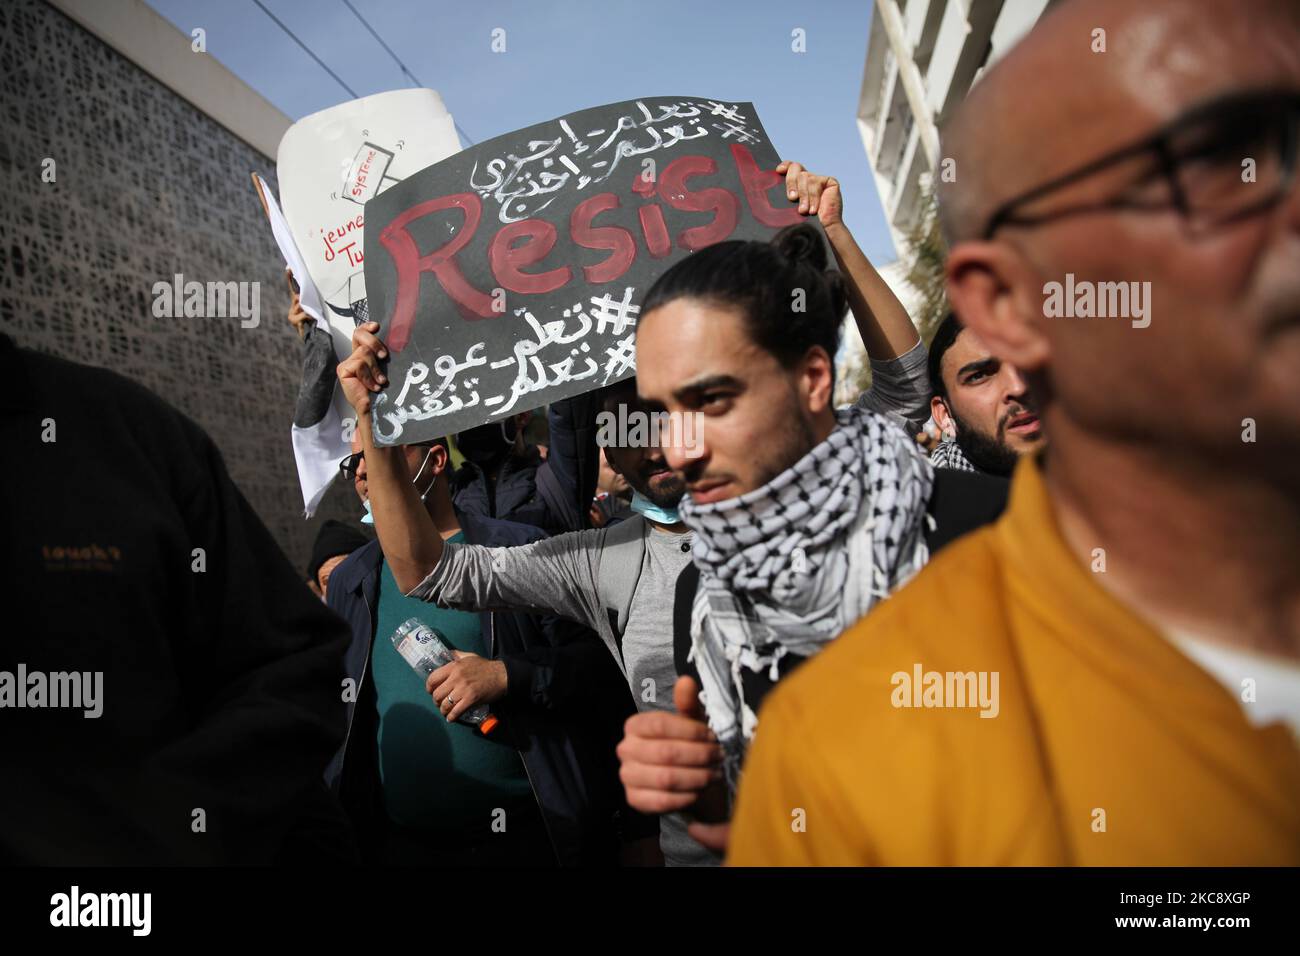 A young Tunisian protesters lifts a placard that reads ‘resist’ as he took part in a march held towards avenue Habib Bourguiba in the capital Tunis in commemoration of the 8th anniversary of the assassination of the leftist opposition politician Chokri Belaid to call for uncovering the truth about the assassination of Chokri Belaid. Demonstrators also protested against police repression and demanded the release of young people arrested by the security forces. Some young protesters called for the decriminalization of Cannabis and soft drugs, and some others called for the fall of the government Stock Photo